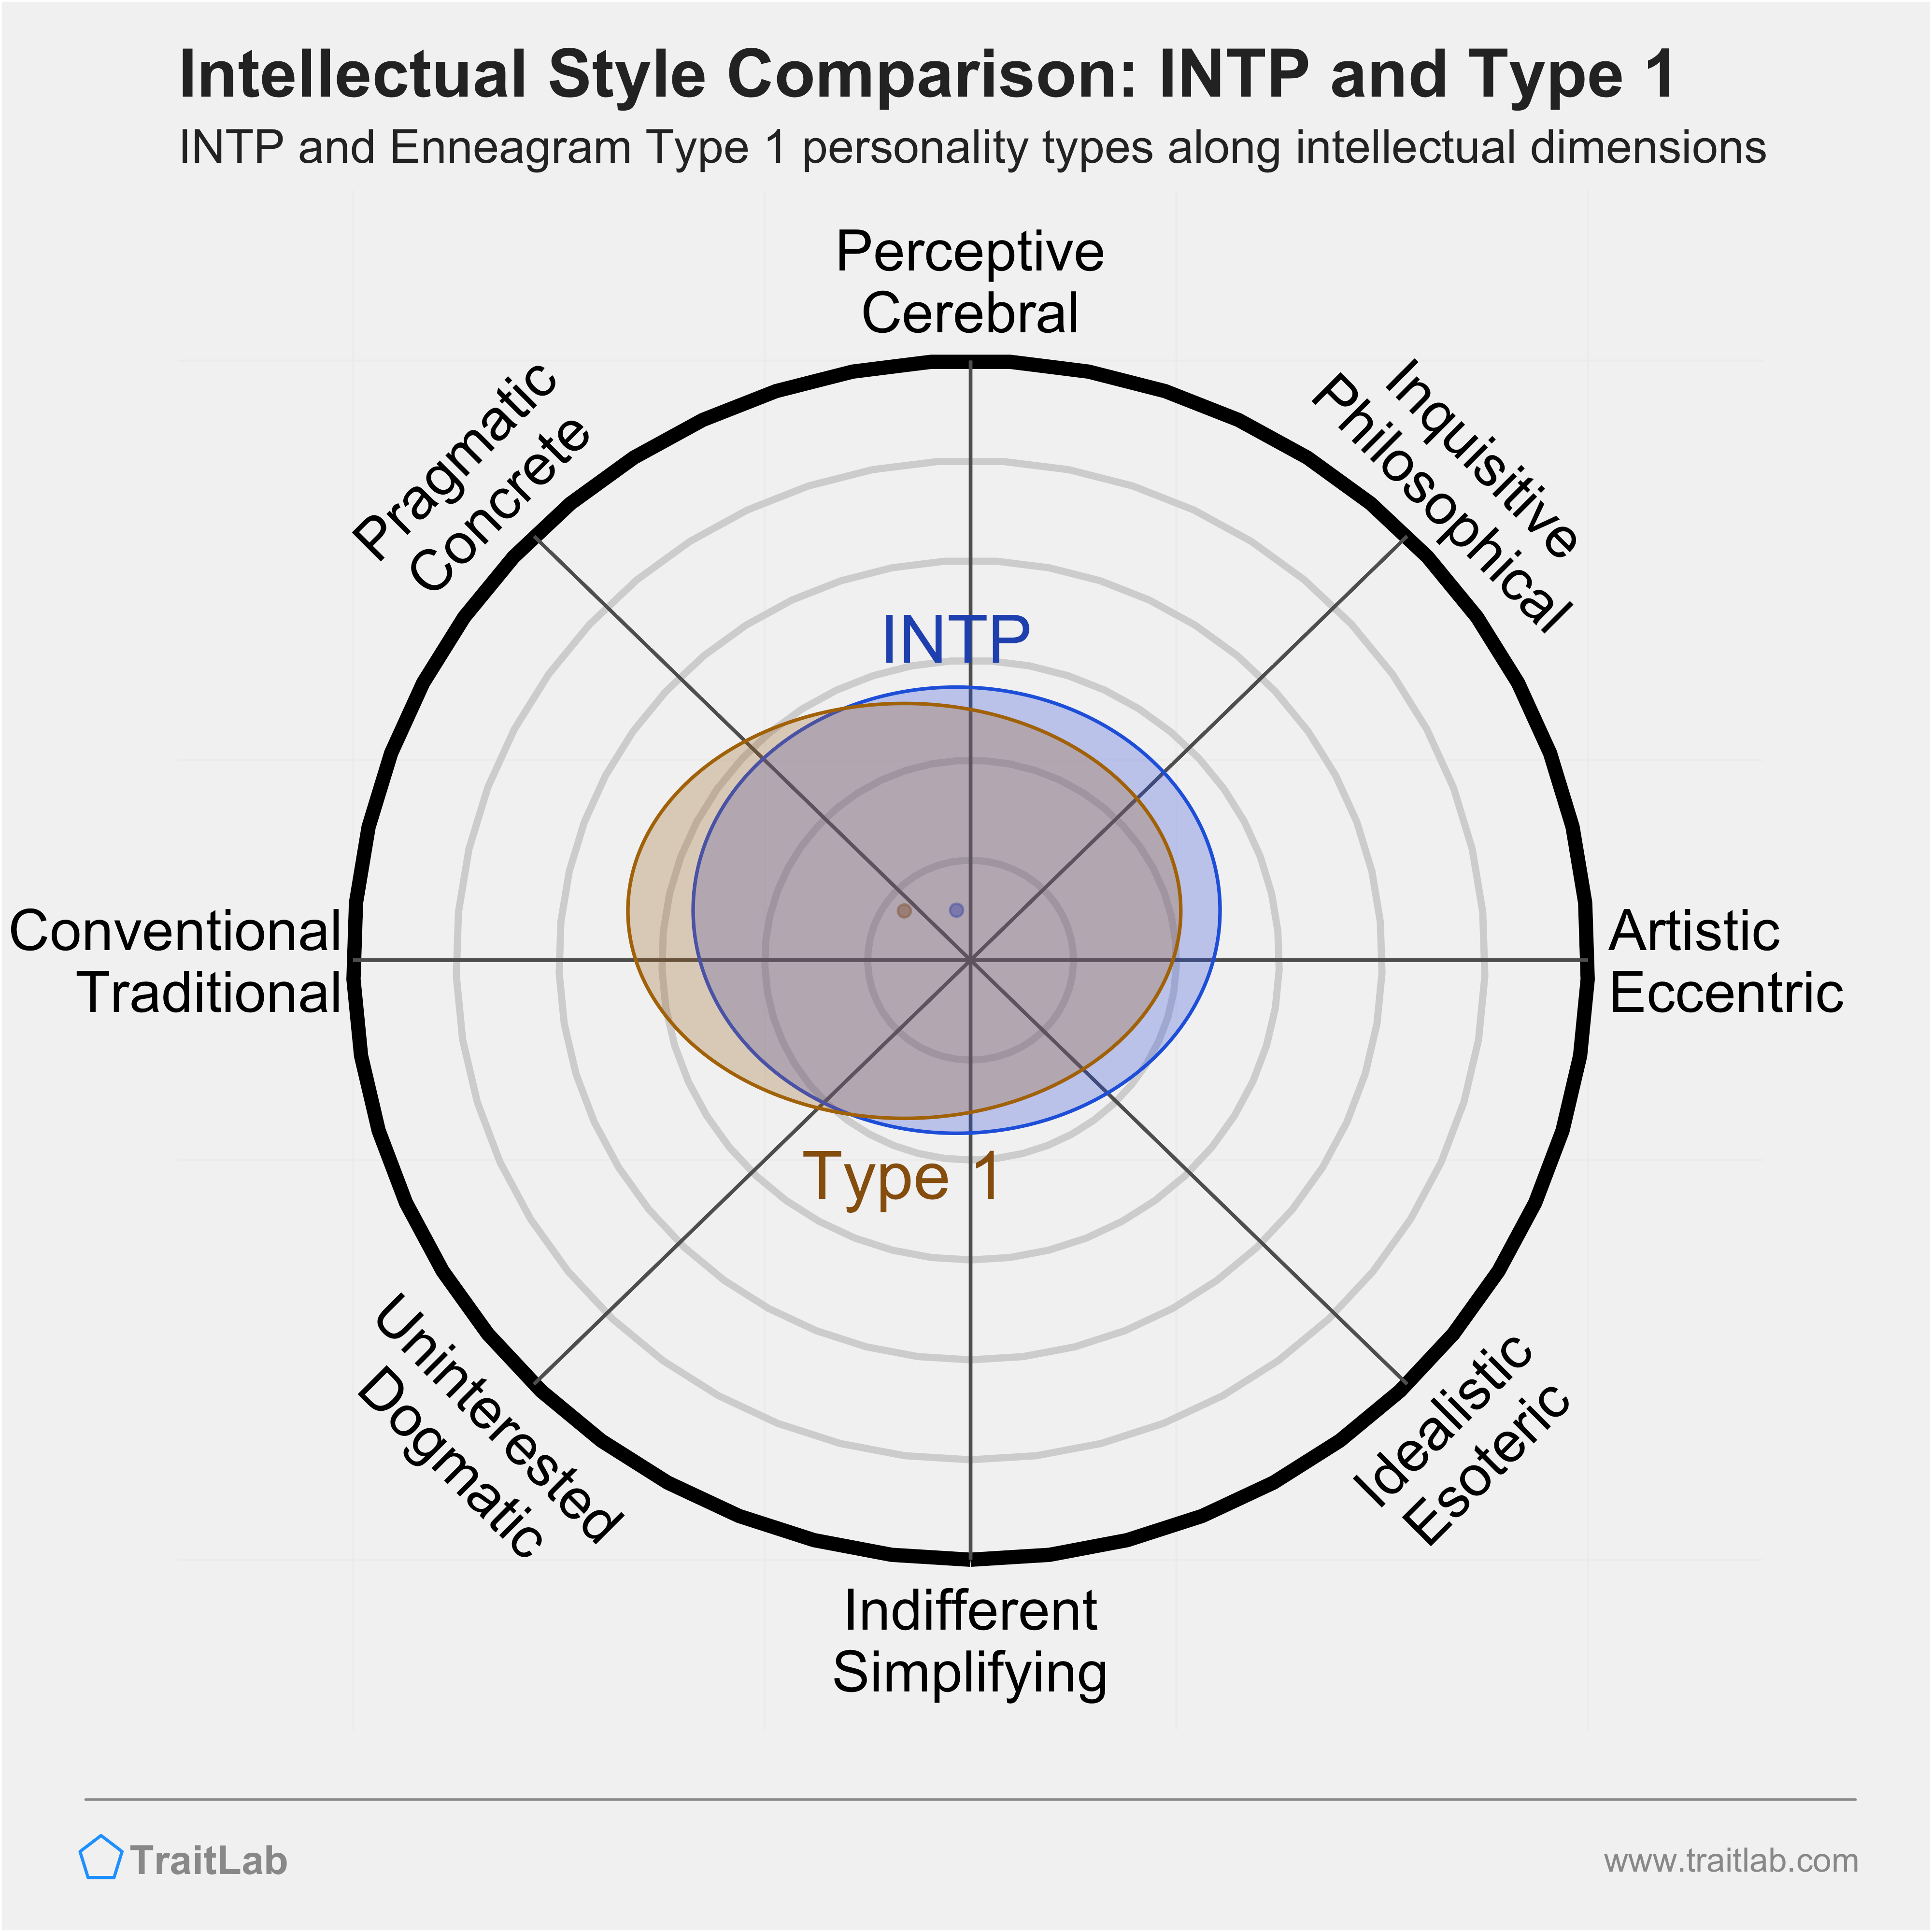 INTP and Type 1 comparison across intellectual dimensions